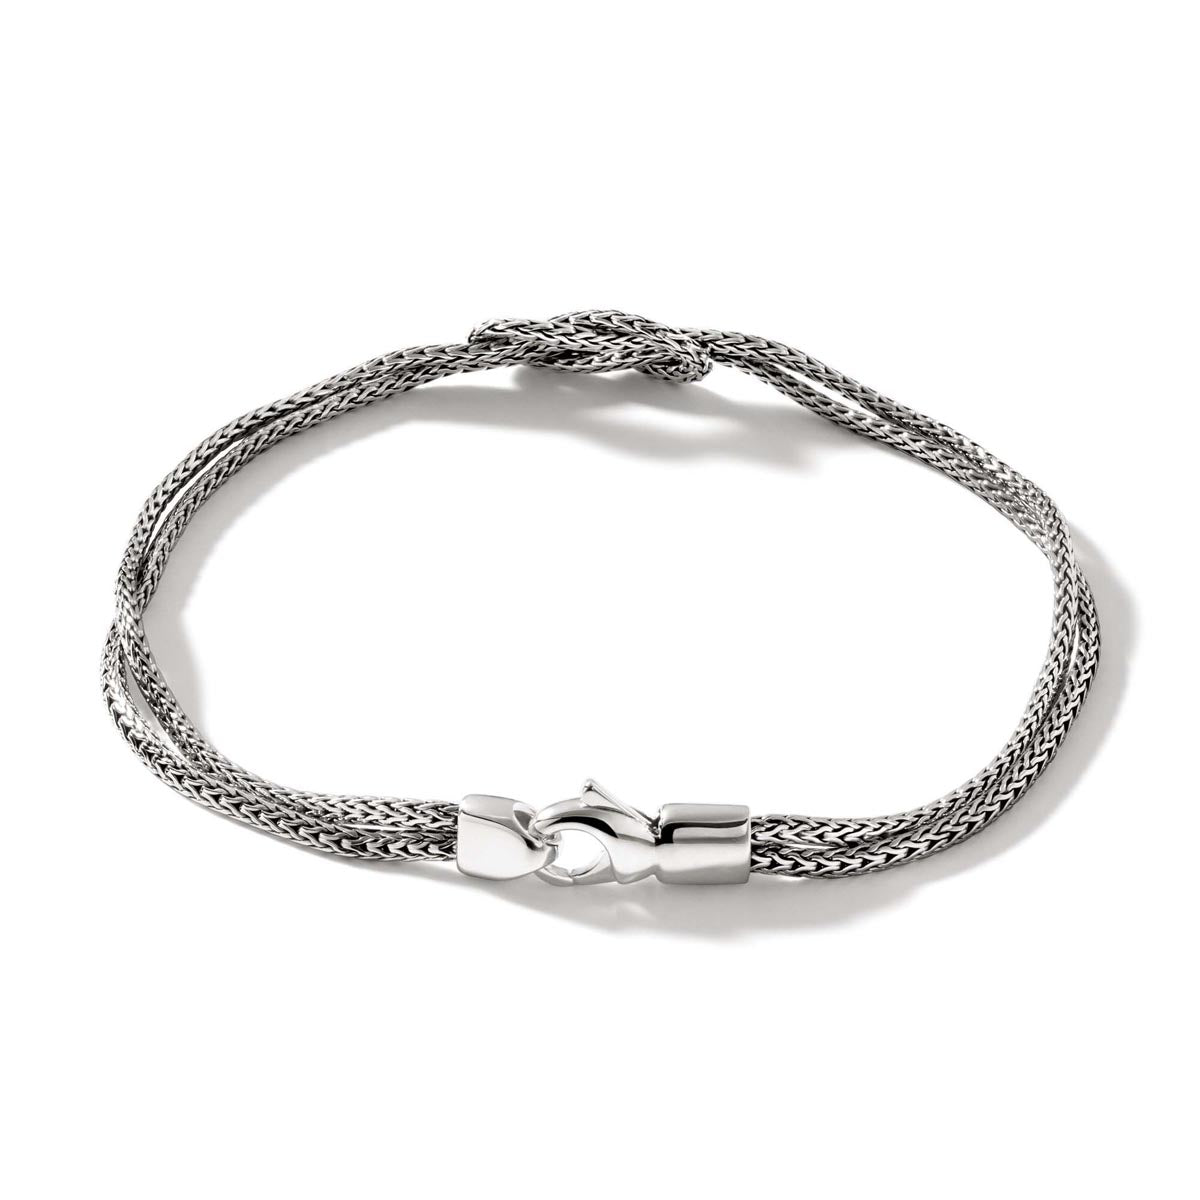 John Hardy Classic Chain Collection Manah Double Row Bracelet in Sterling Silver